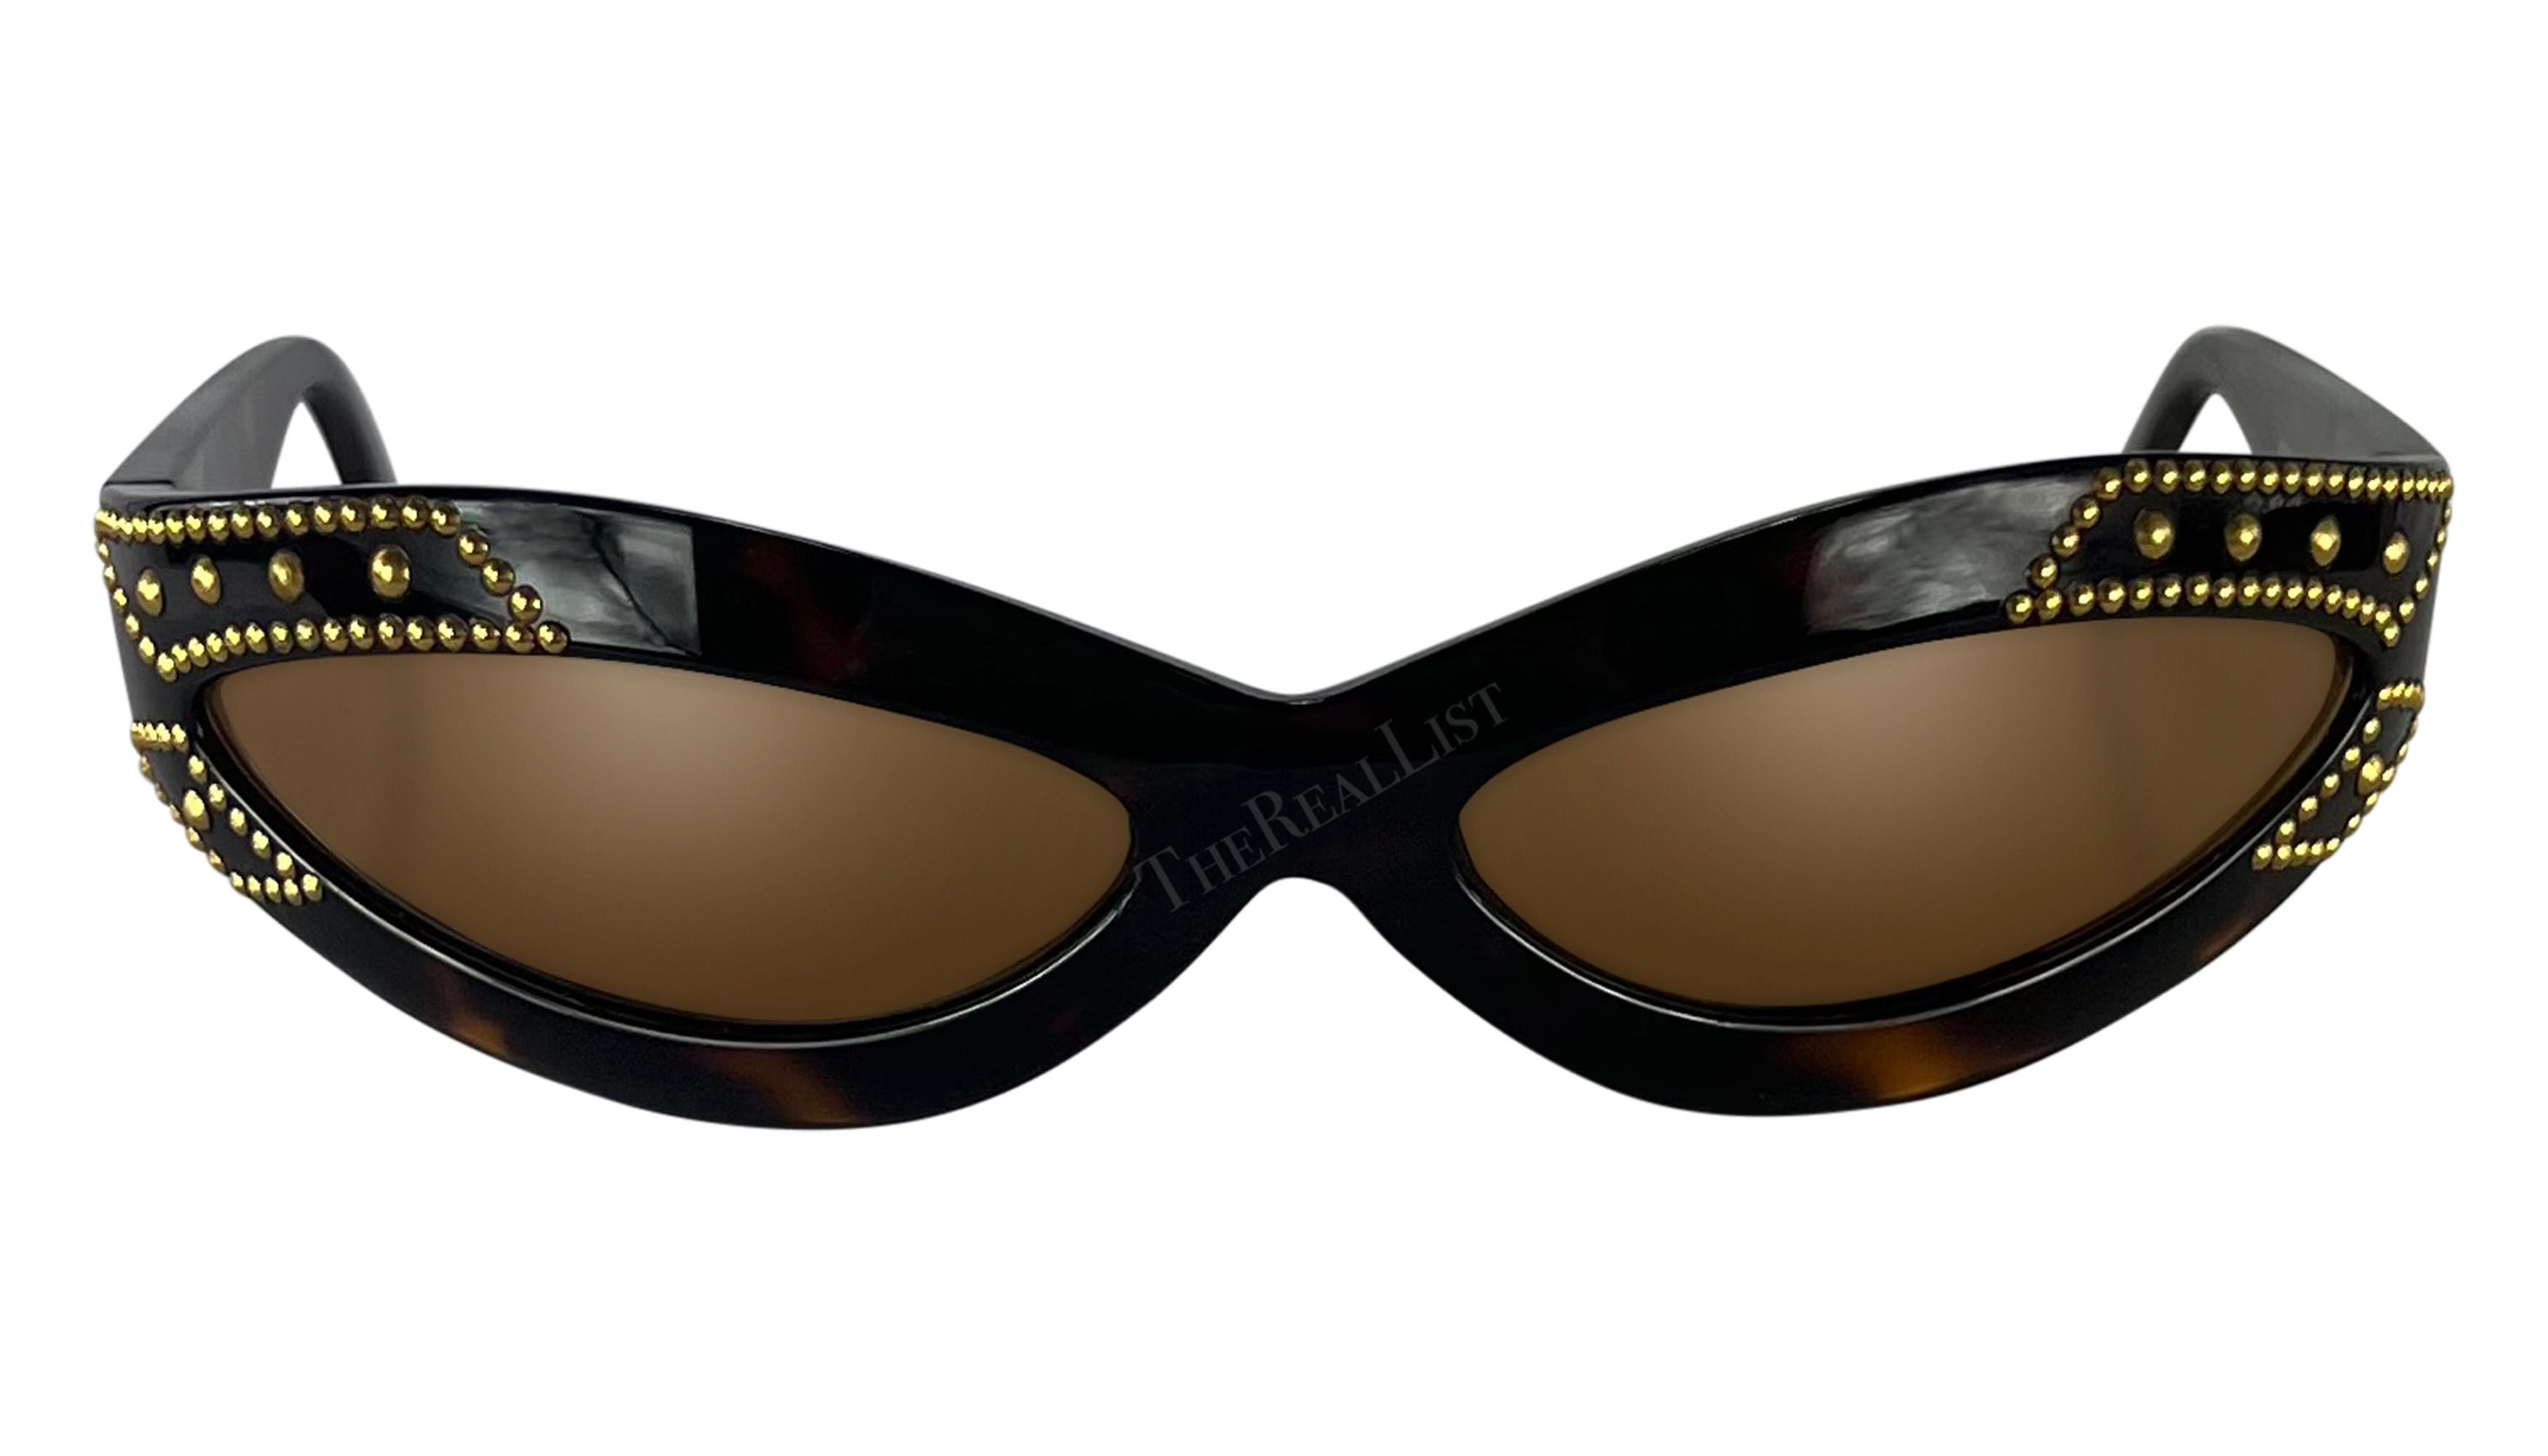 From the 1990s, these faux tortoise shell oval sunglasses, designed by Gianni Versace, feature a wrap around style accented with gold-tone studs and a Versace Medusa logo on one side. 

Approximate Measurements-
Frame Height: 2